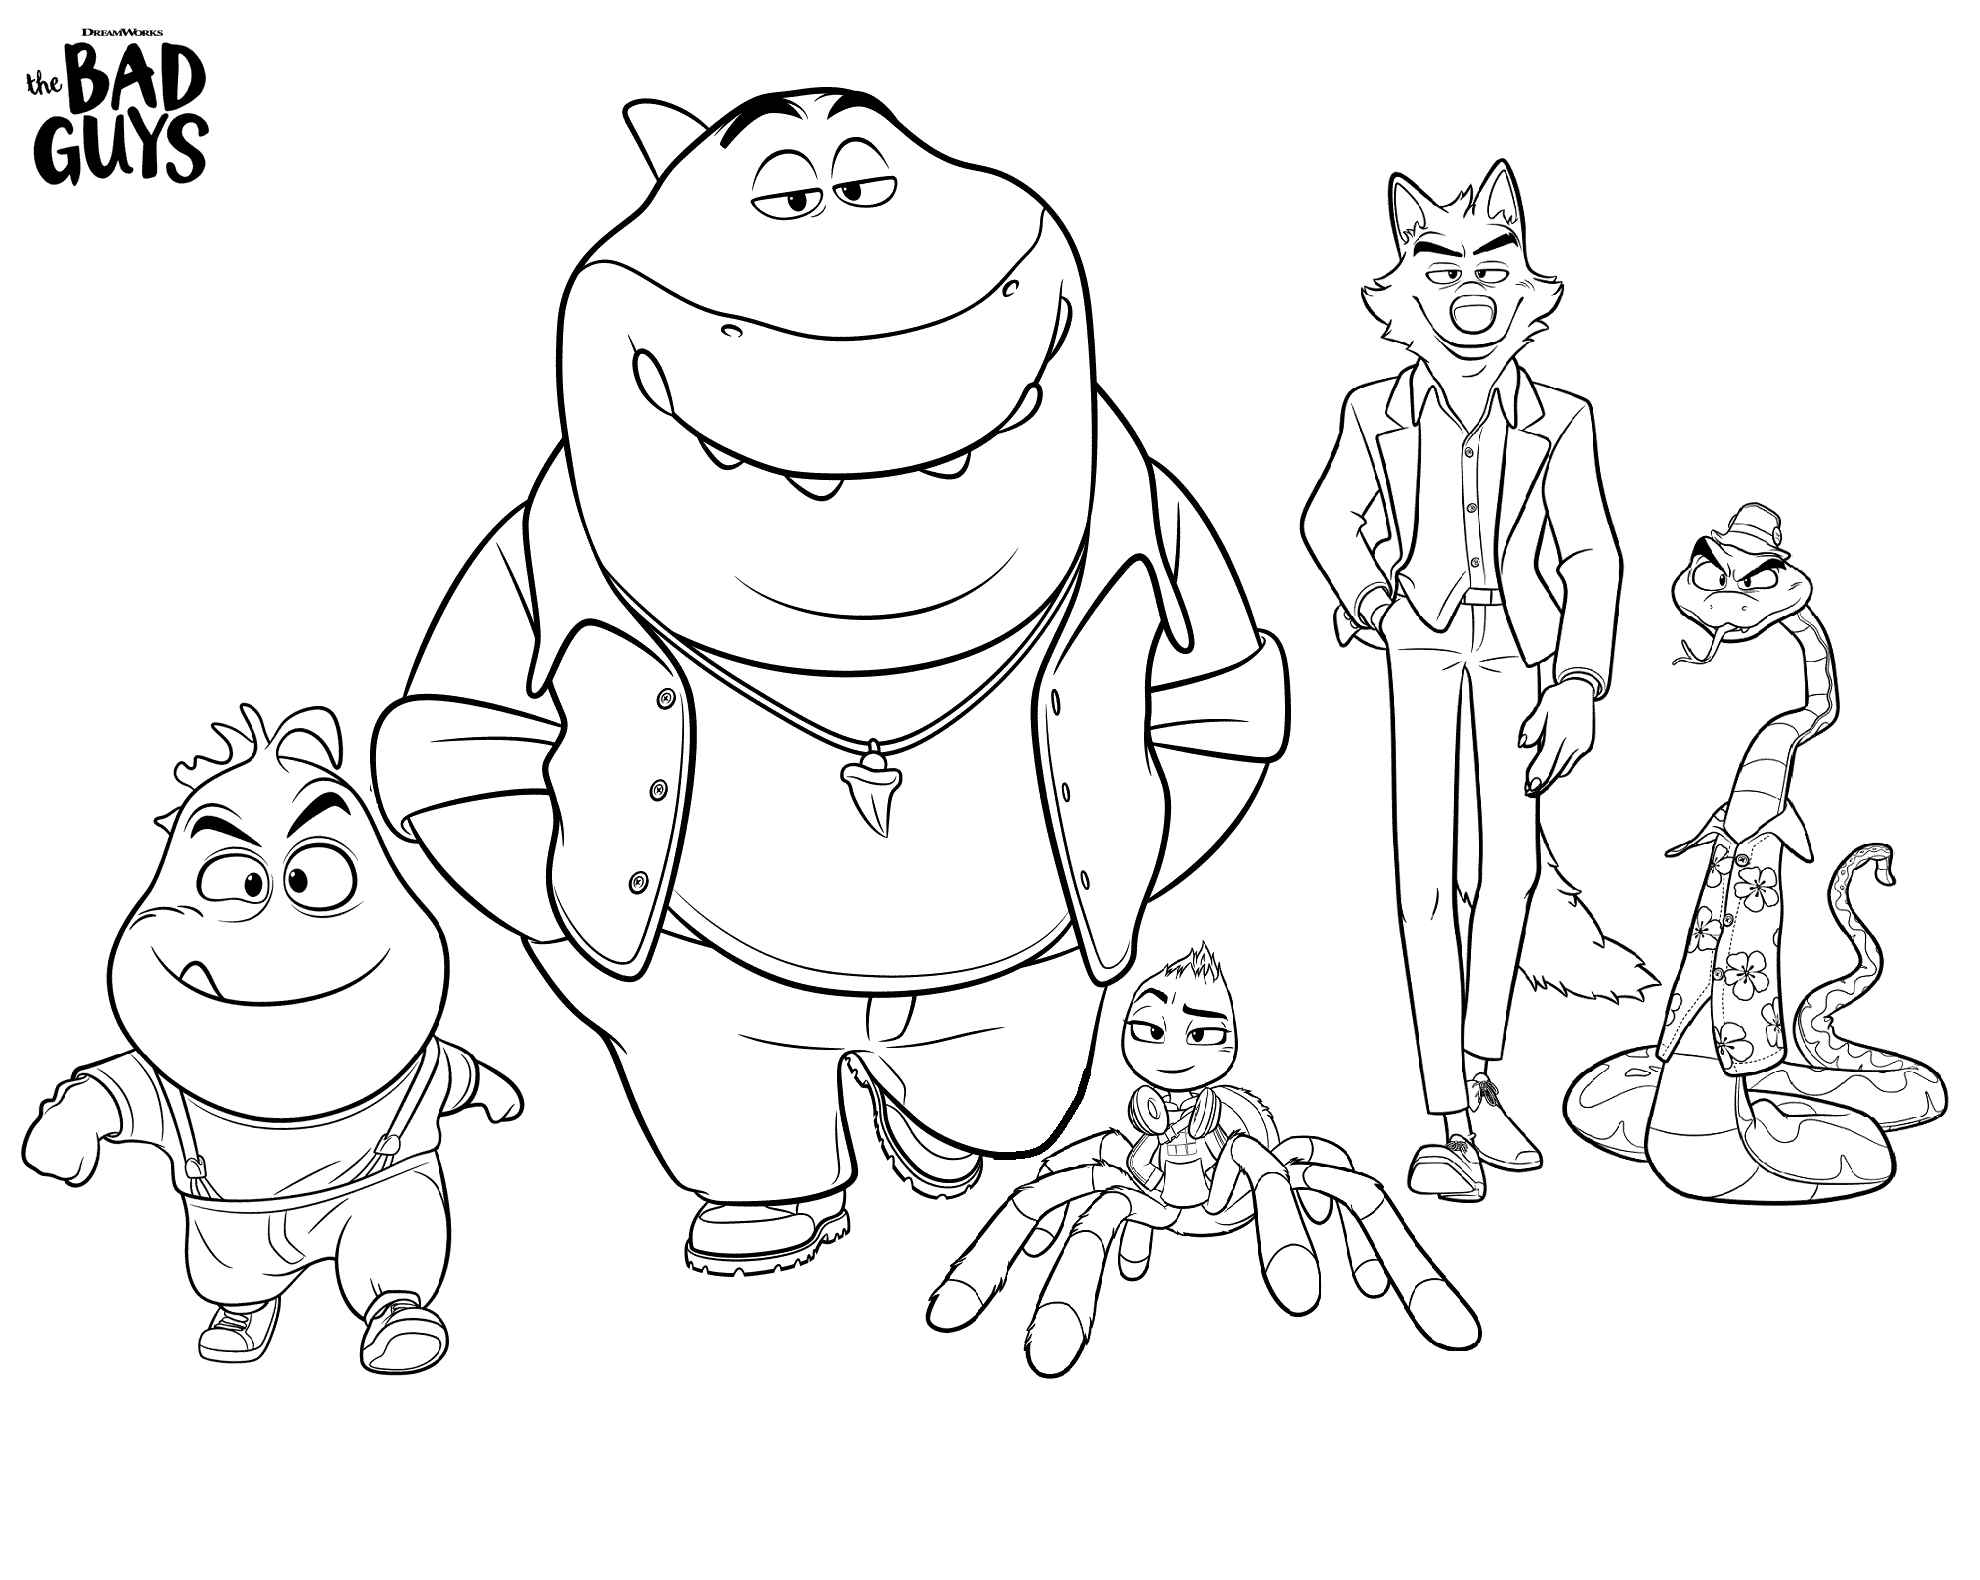 The Bad Guys Gang Coloring Pages